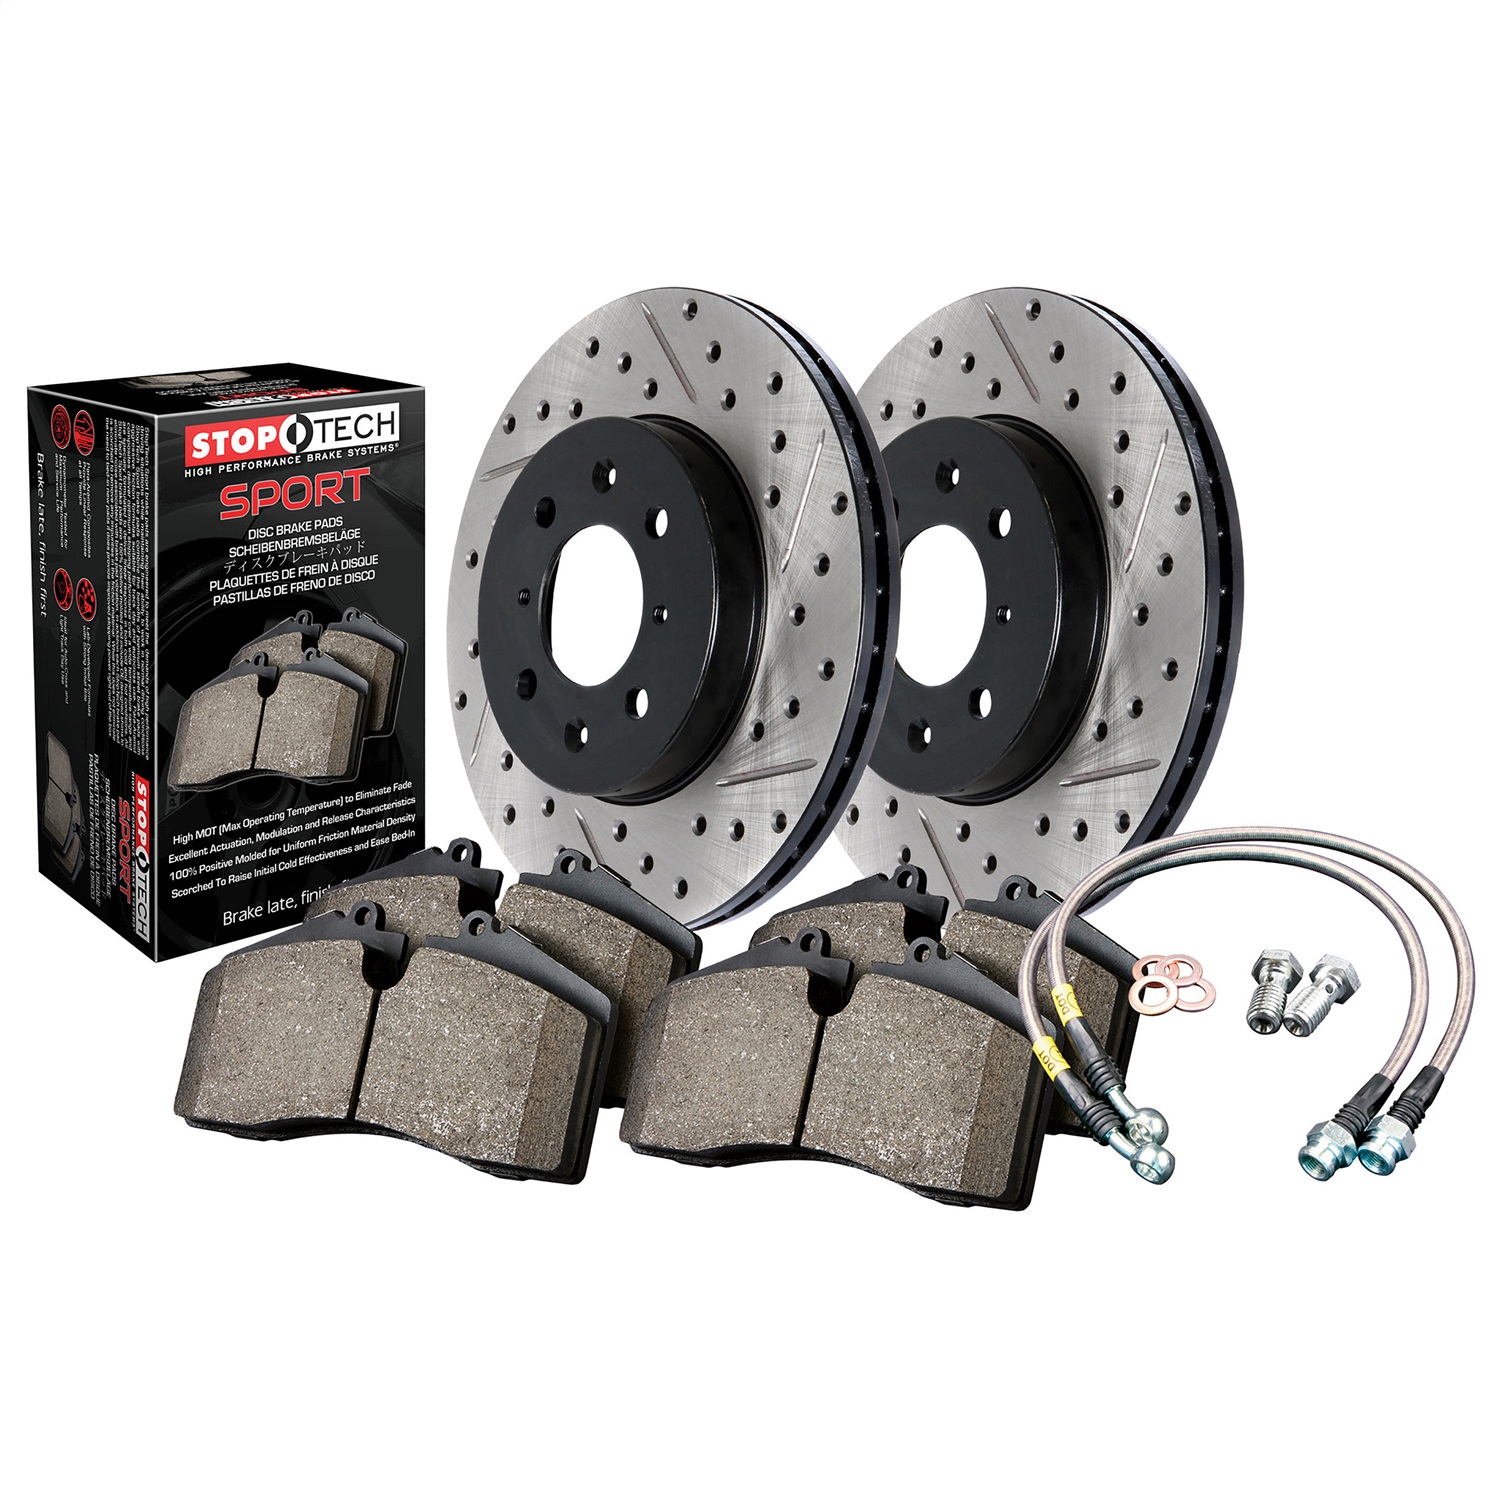 StopTech 978.51000F Sport Disc Brake Kit w/Cross-Drilled And Slotted Rotors